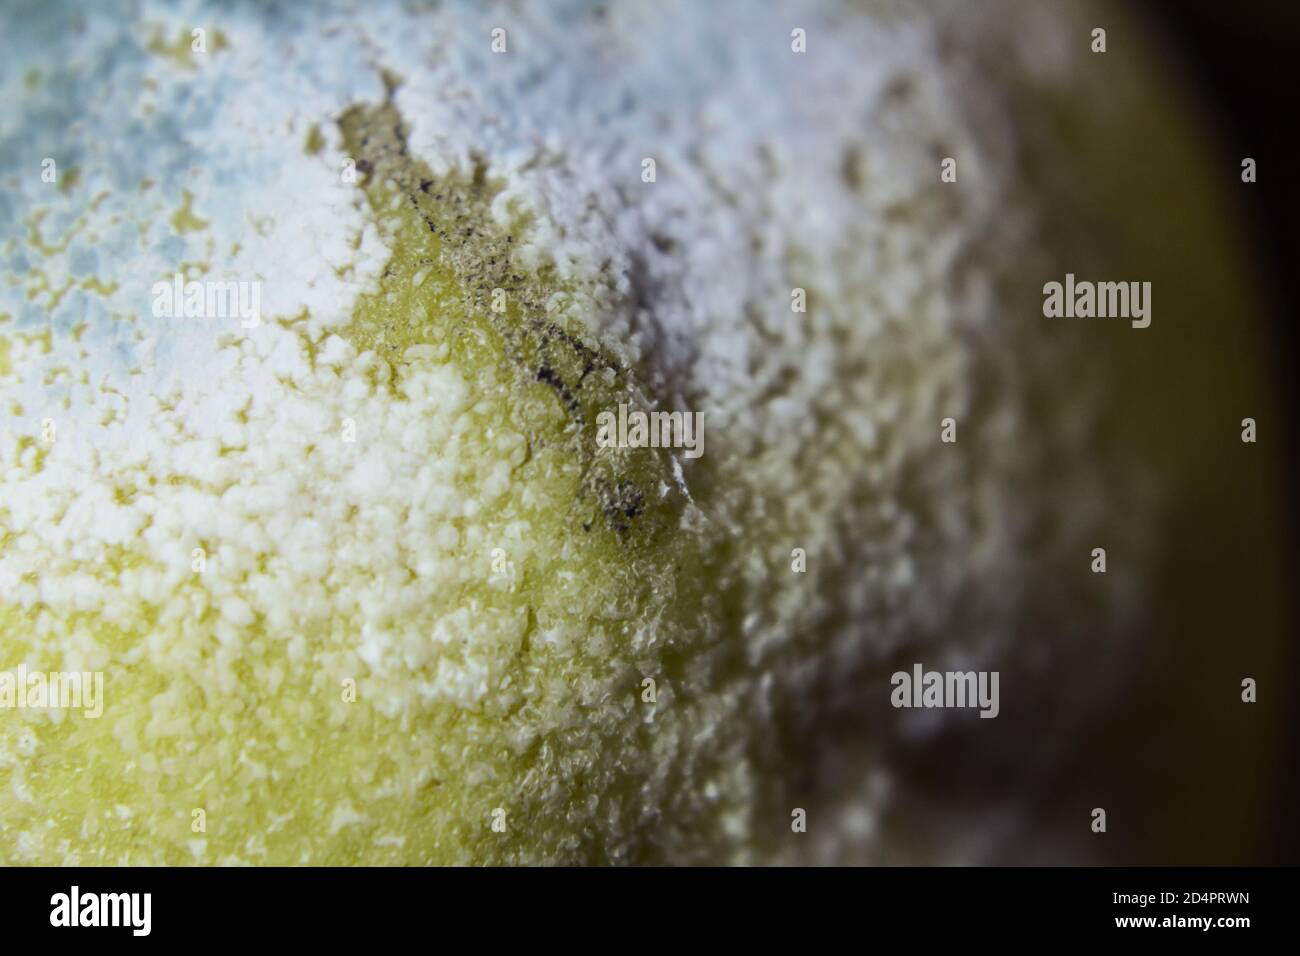 Detail of mold on the surface of a lemon - Macro Stock Photo